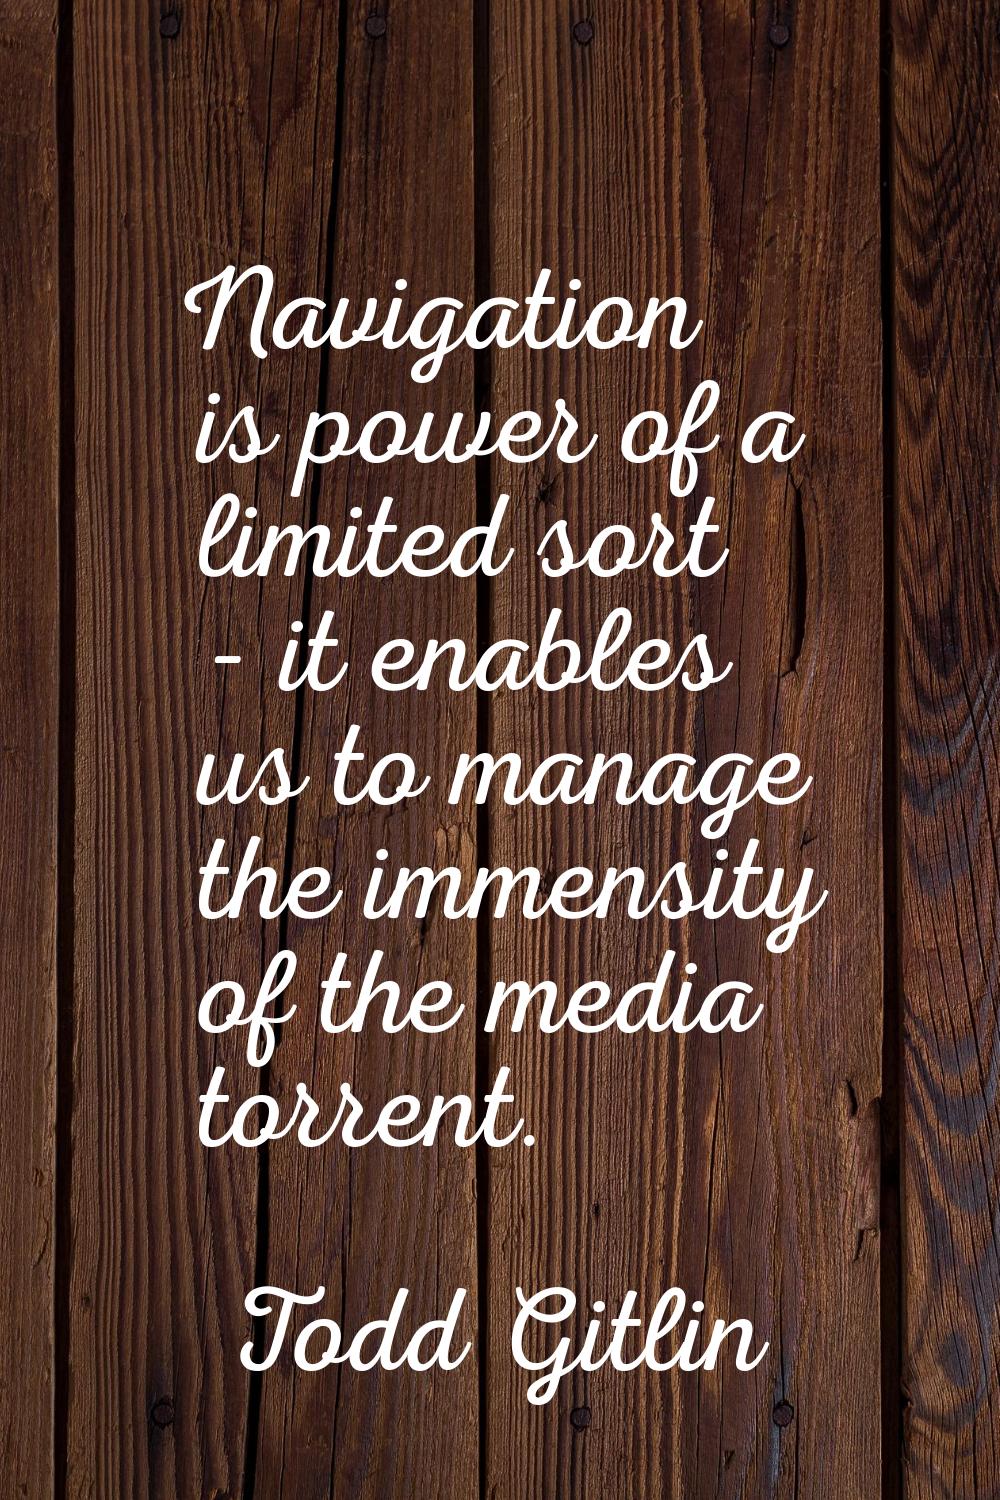 Navigation is power of a limited sort - it enables us to manage the immensity of the media torrent.